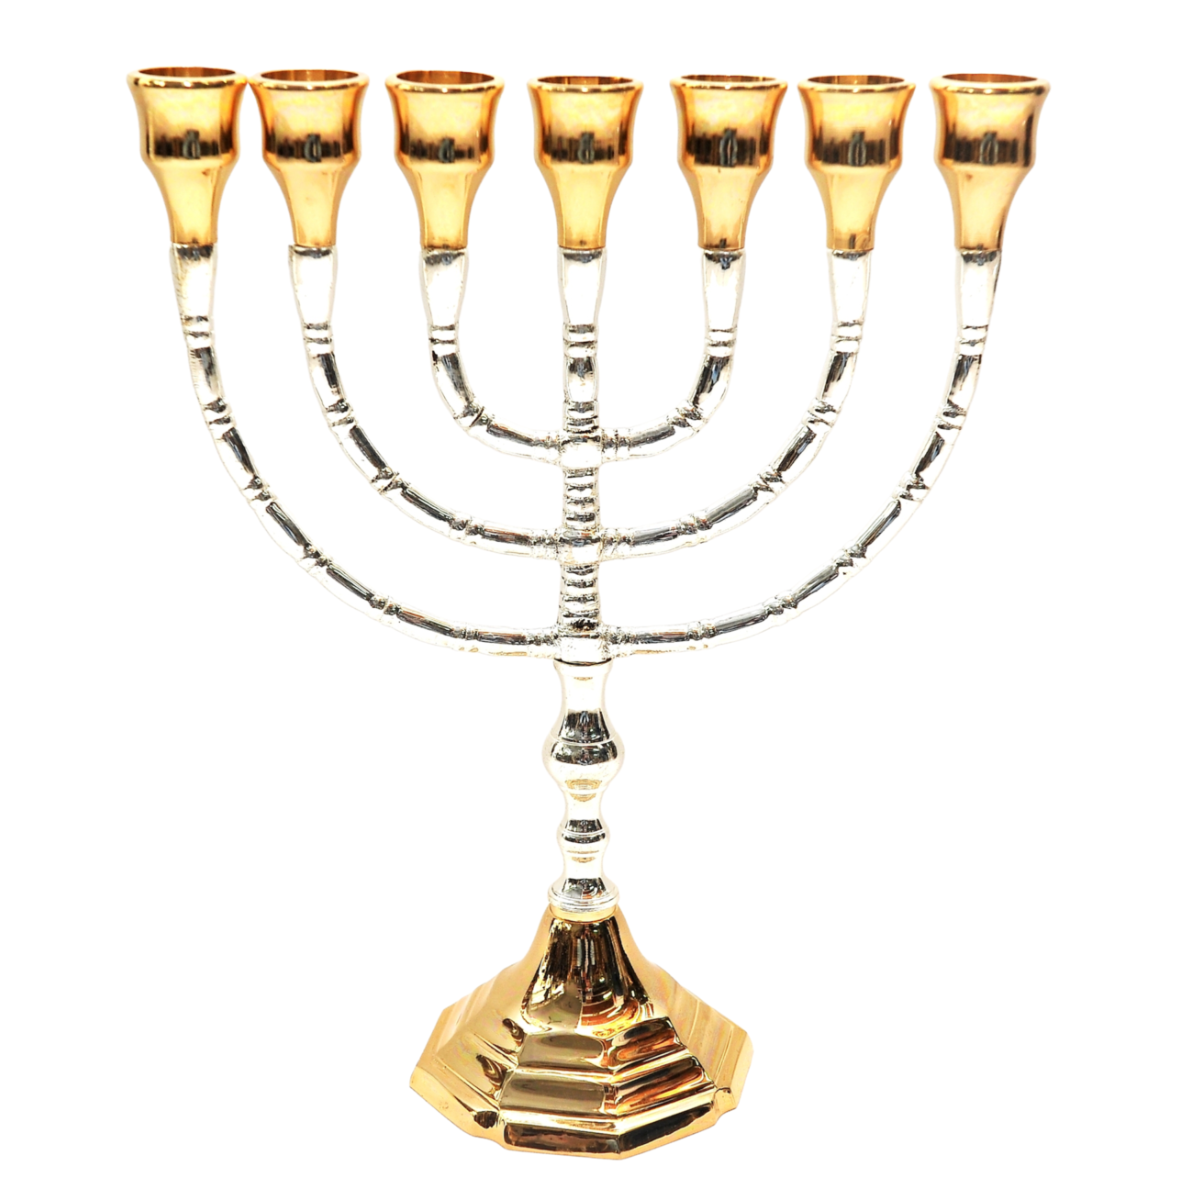 Menorah In Gold & Silver Plated Authentic Temple Candle Holder 10.2″ / 26cm